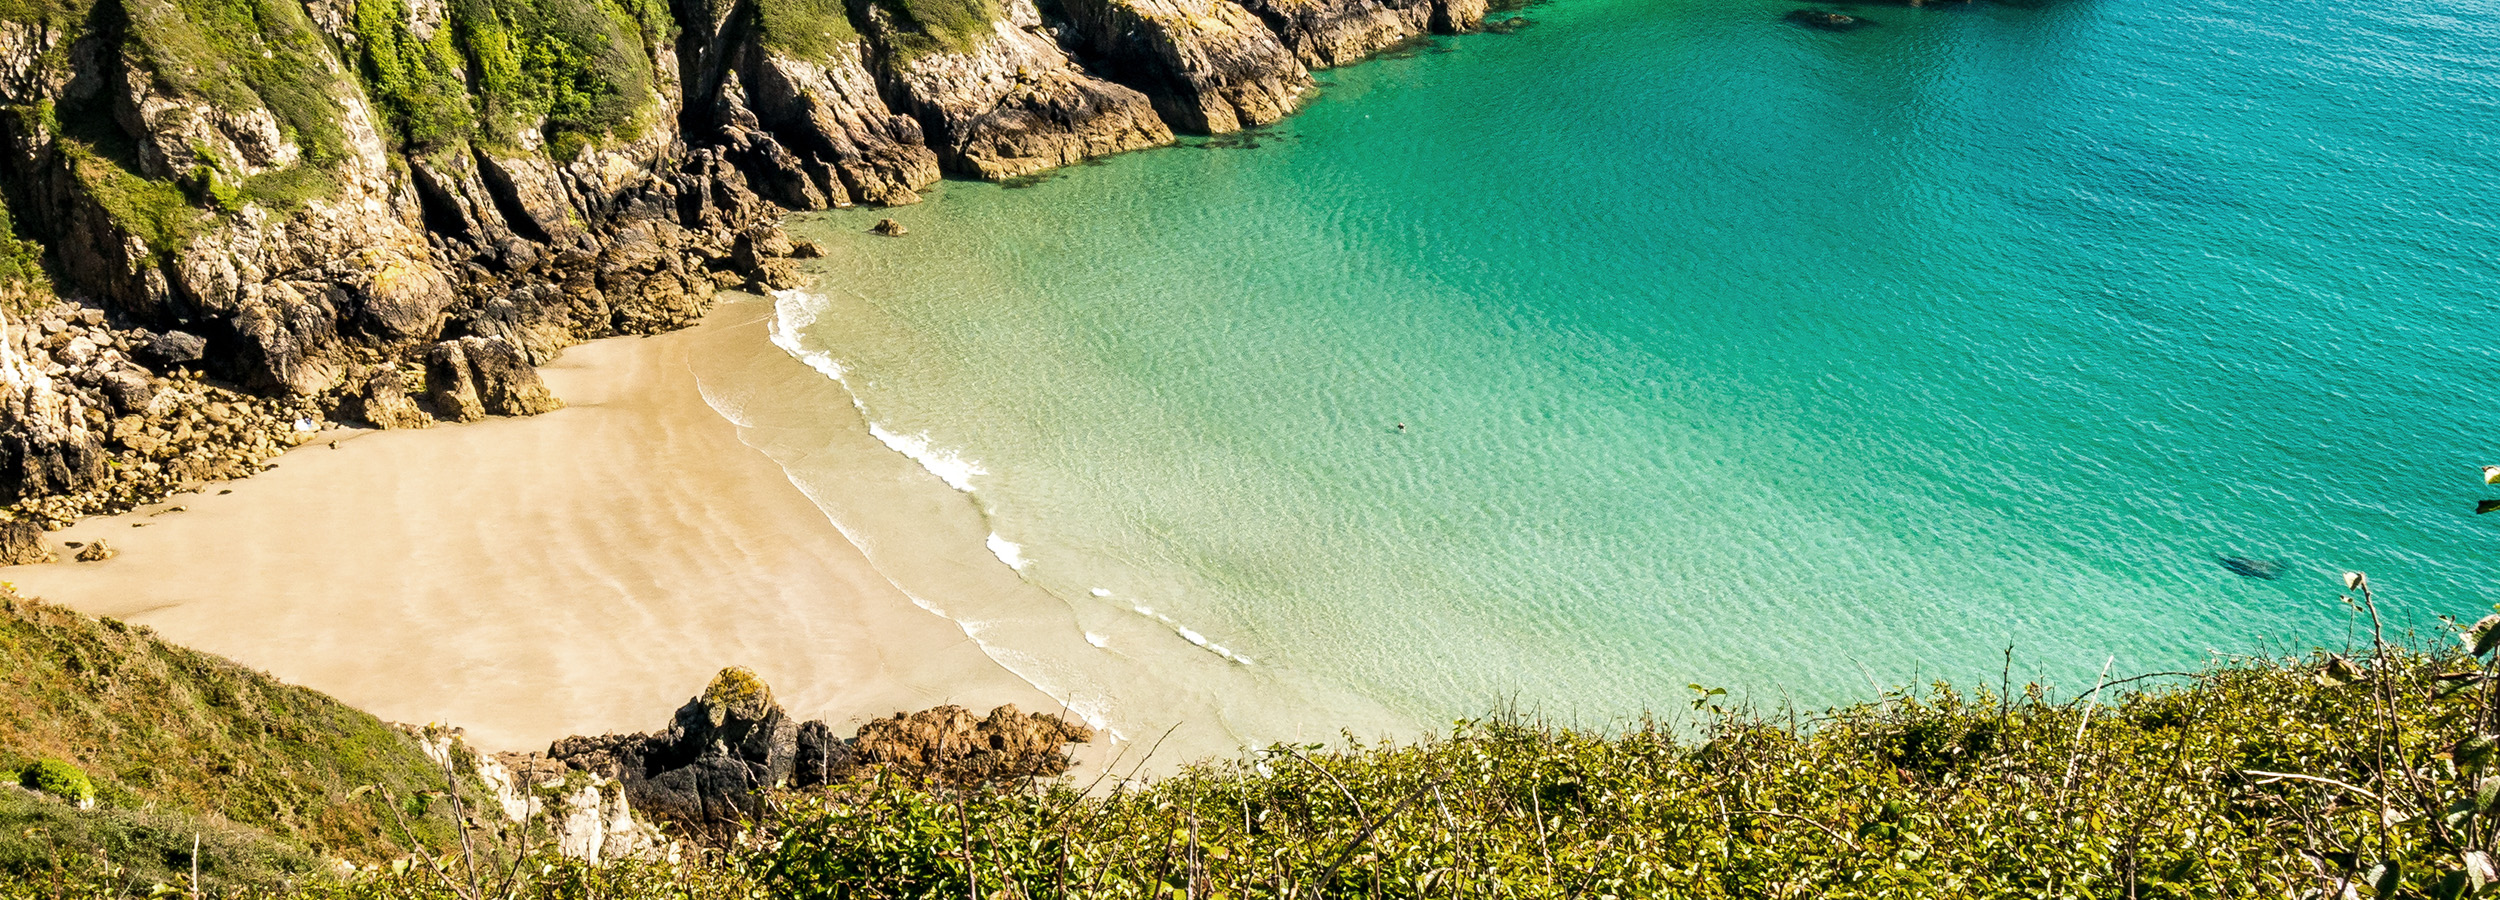 Sail away to Guernsey, from £90